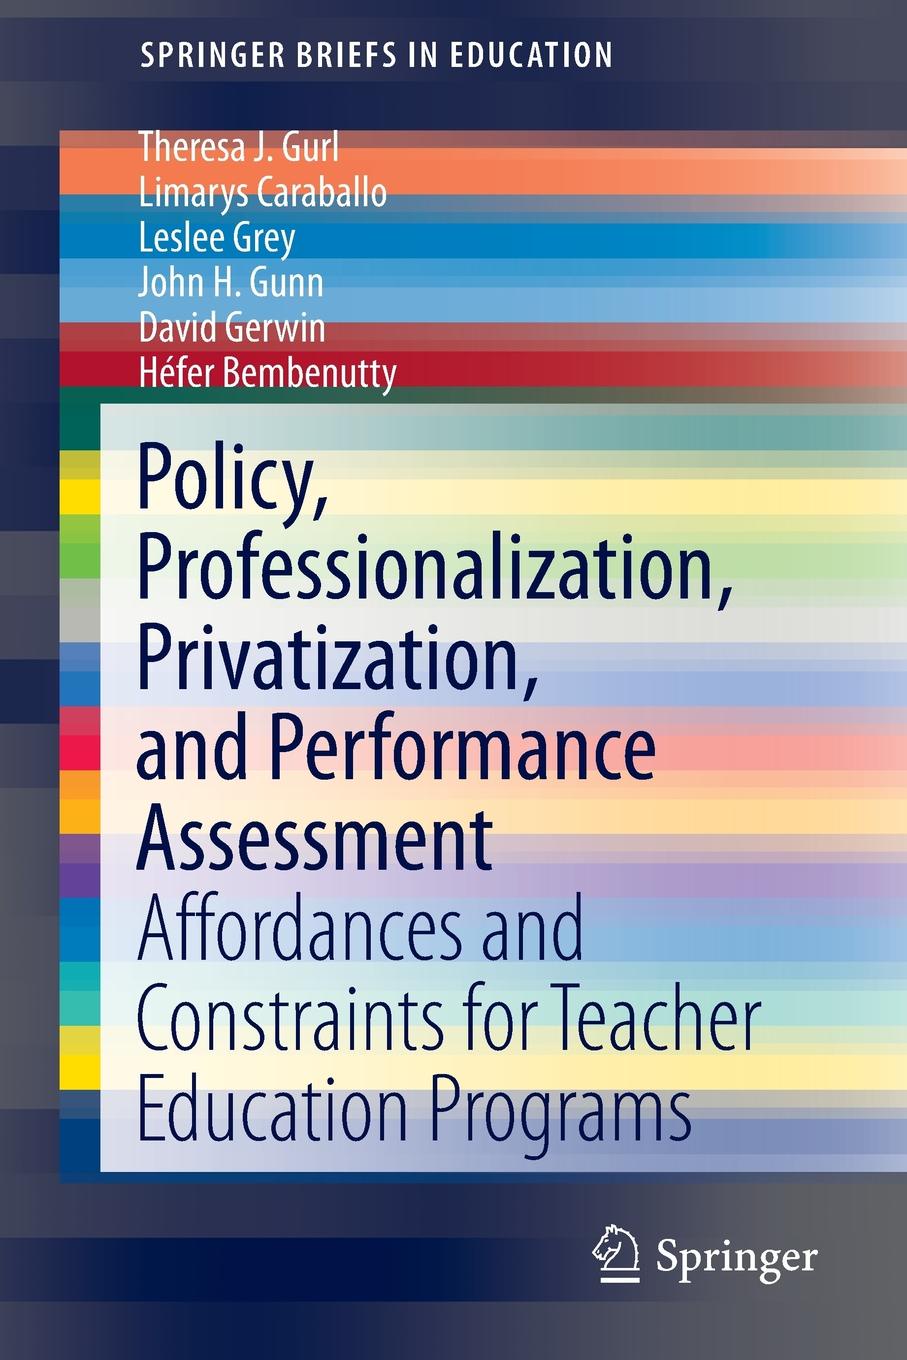 Policy, Professionalization, Privatization, and Performance Assessment. Affordances and Constraints for Teacher Education Programs